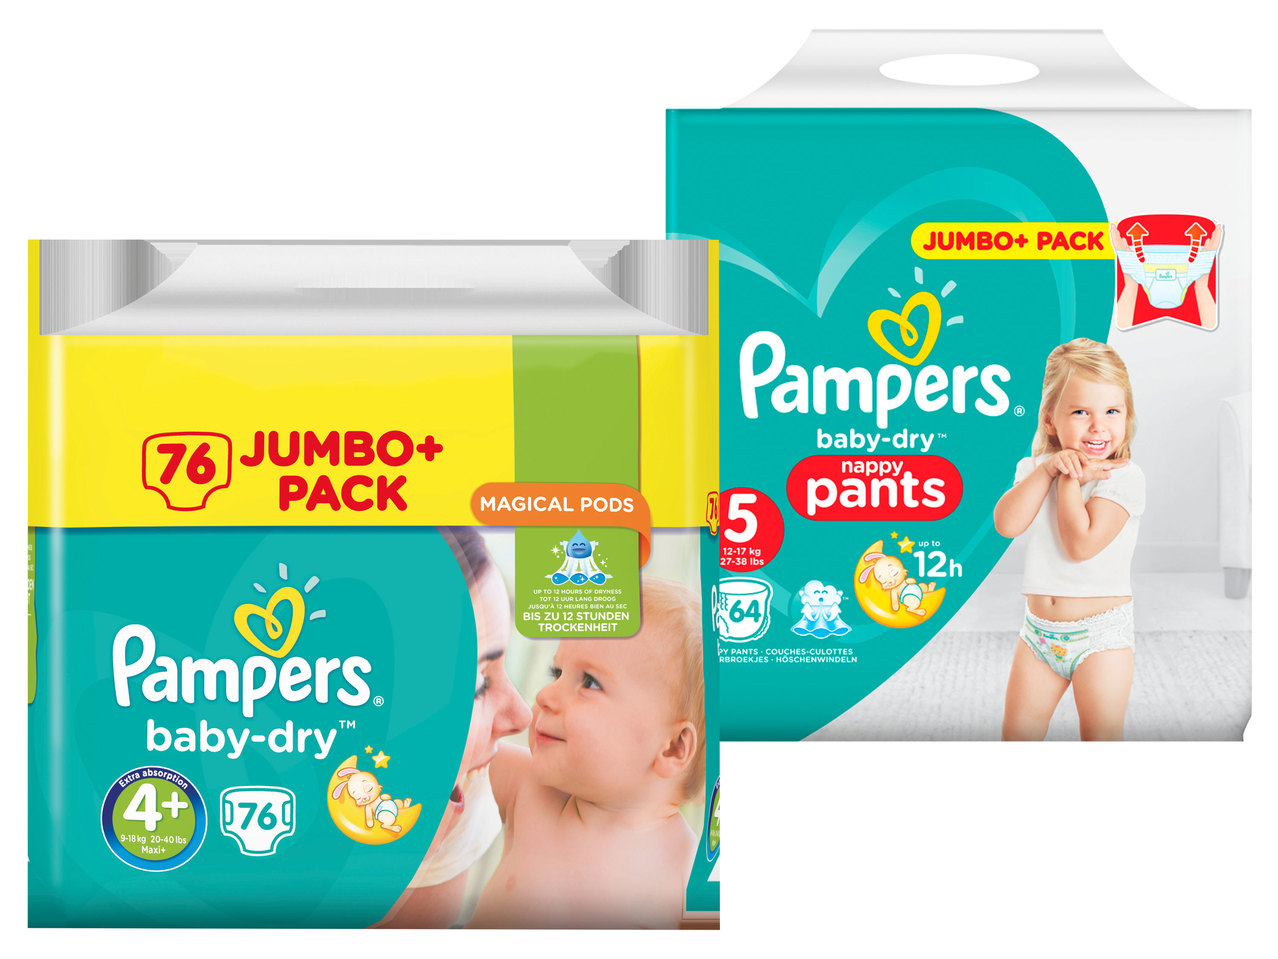 PAMPERS Baby-Dry Windeln/Pants